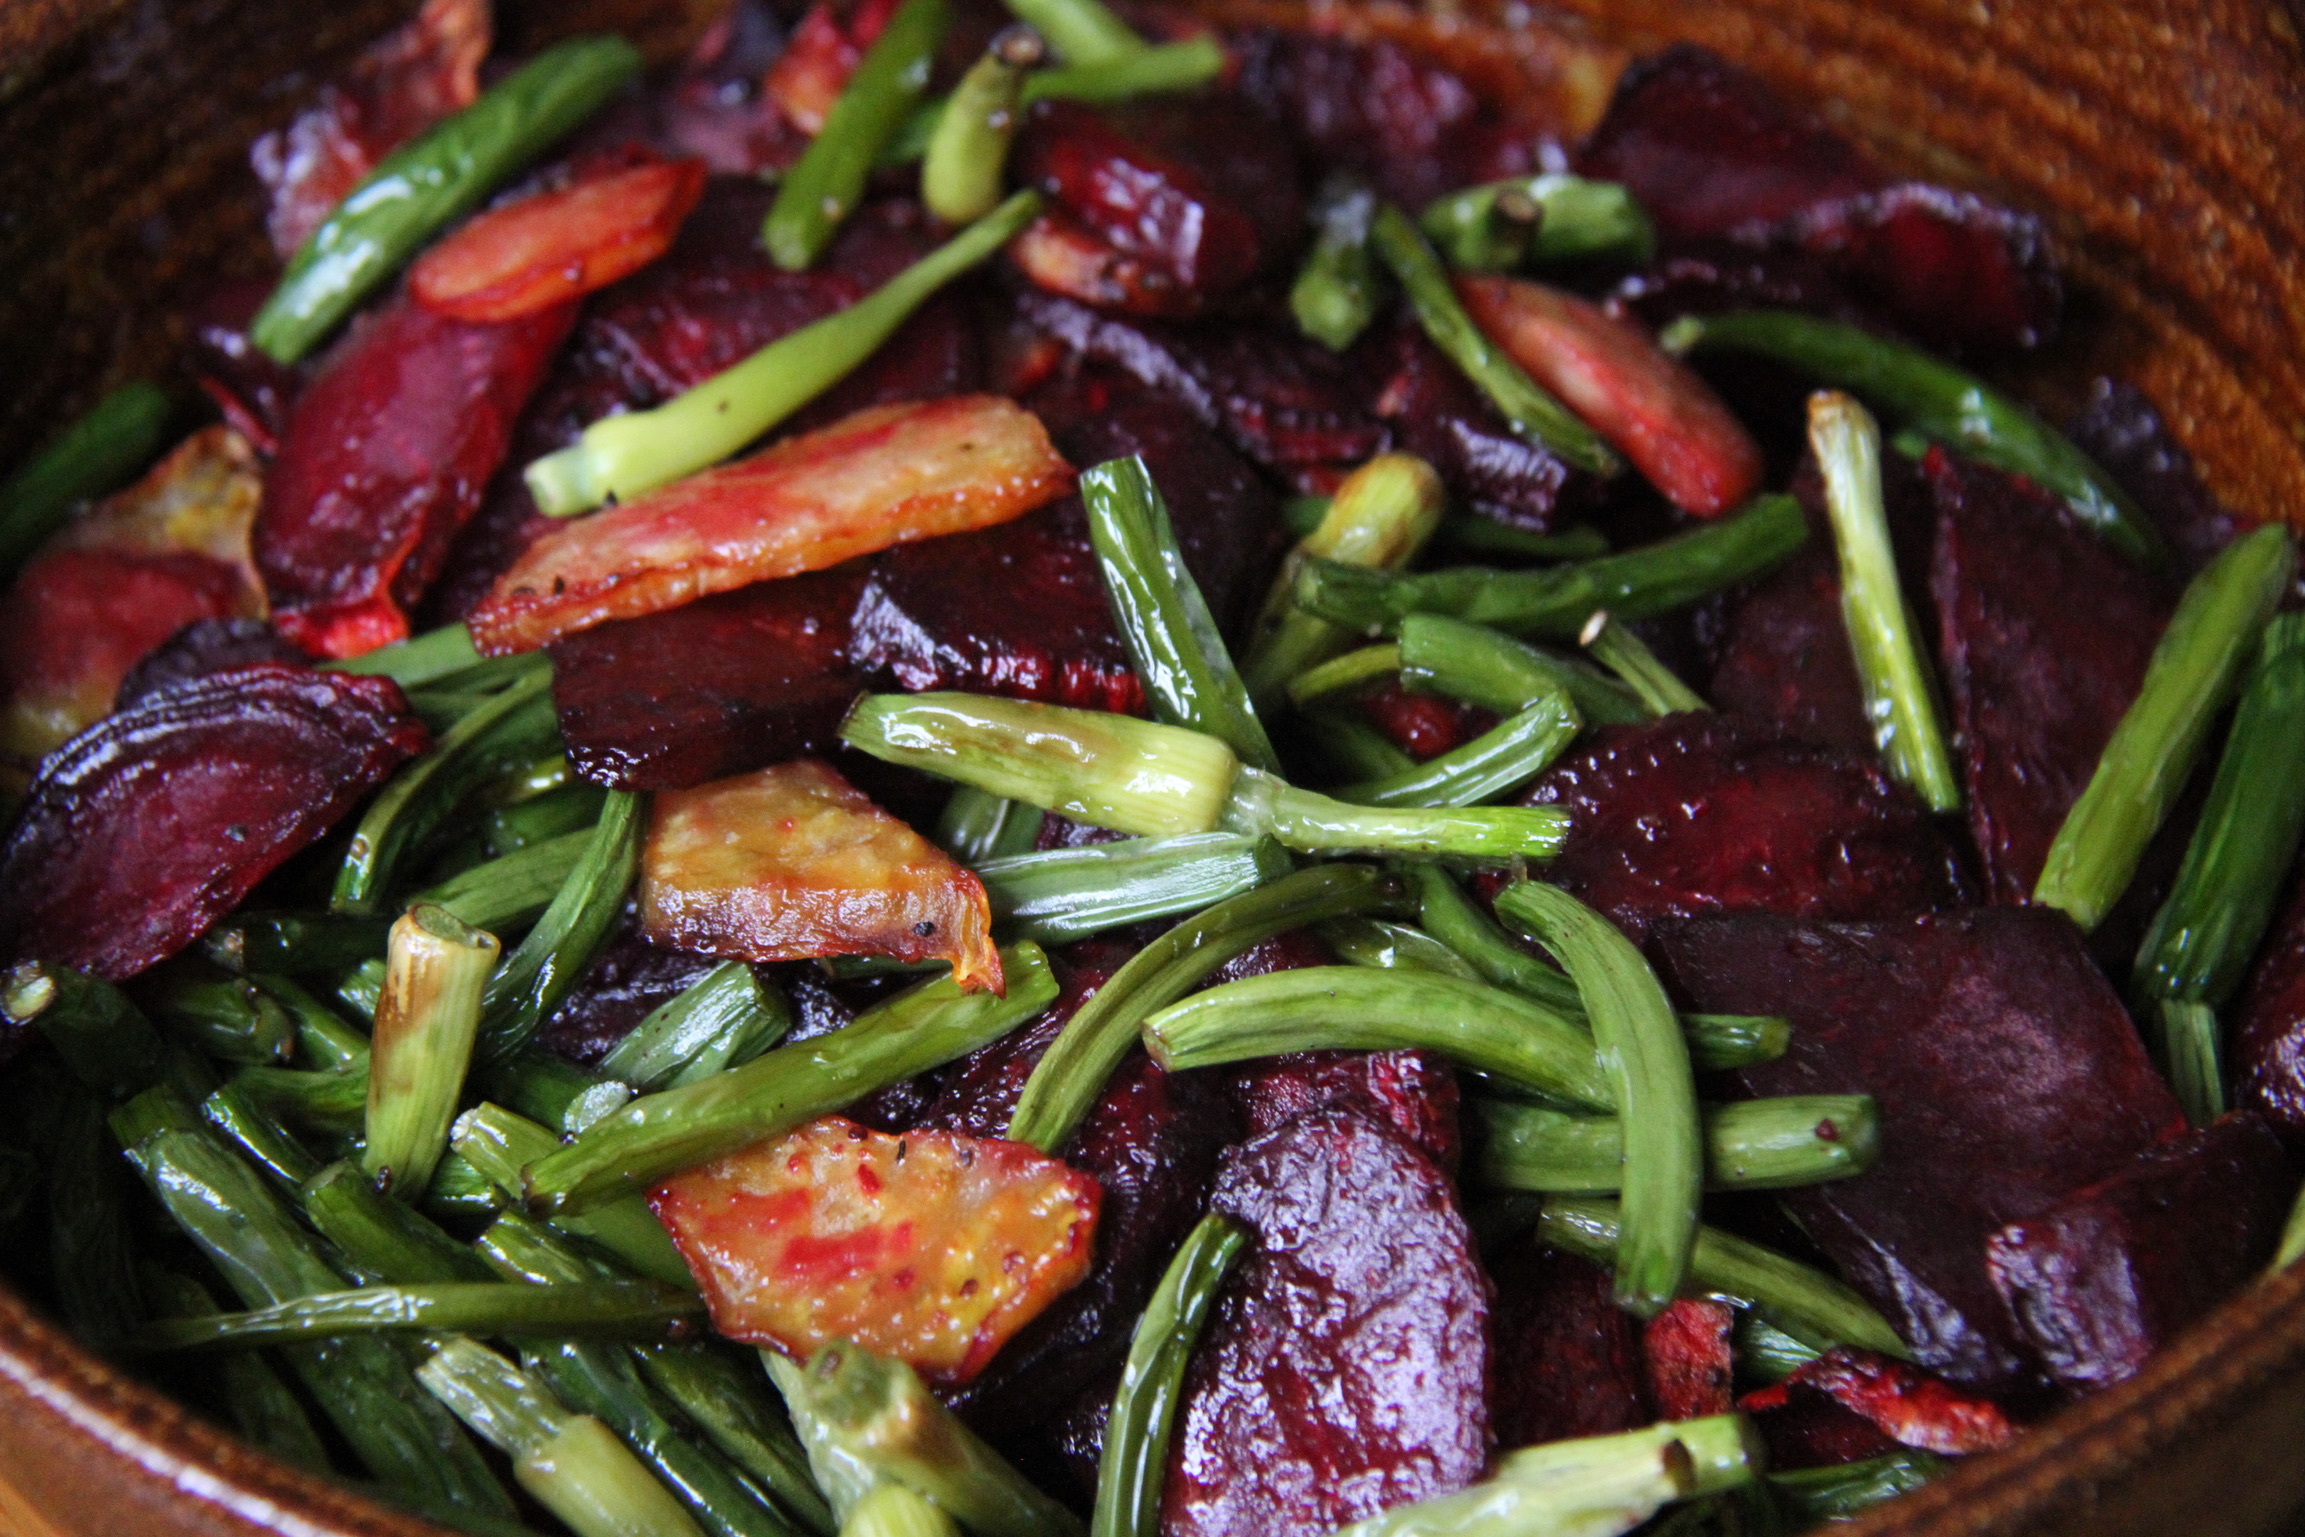 Roasted beets and garlic scapes